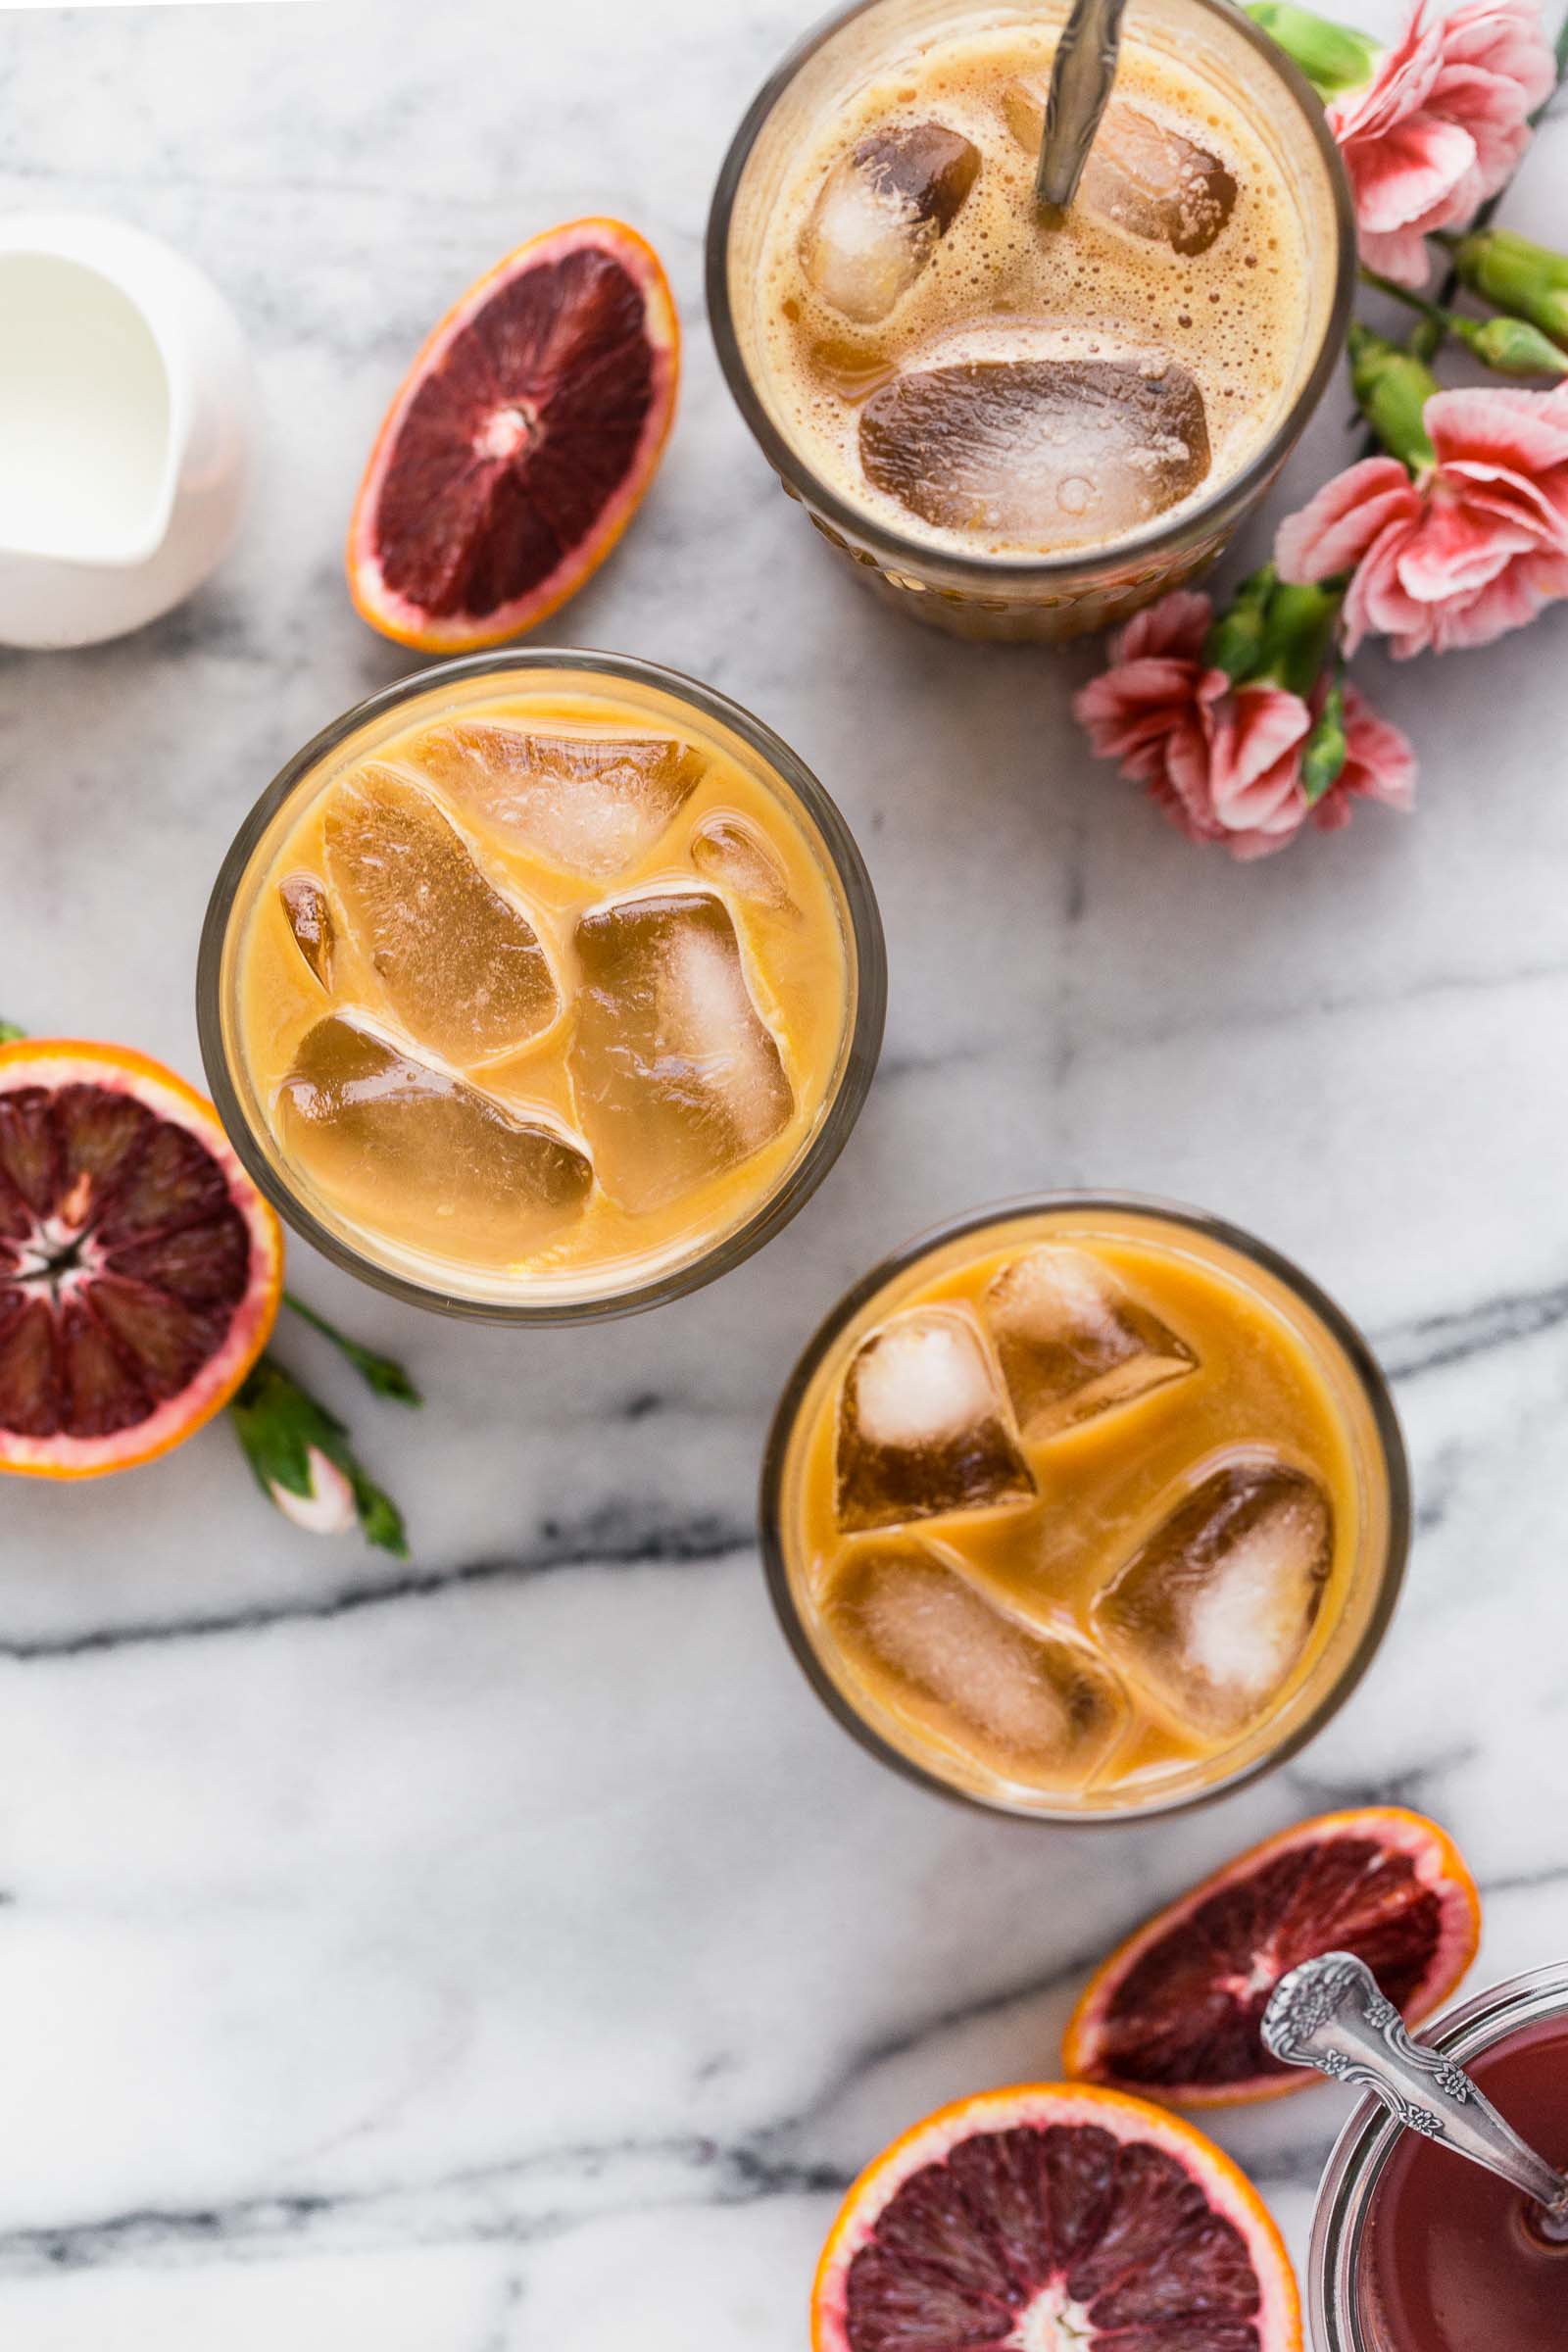 also known as what happens when you spike cold brew coffee with the perfectly not-too-sweet blood orange syrup, blood orange cold brew iced coffee will be your newest winter citrus obsession! #bloodorange #coldbrew #coldbrewcoffee #coldbrewcoffeerecipe #icedcoffee #wintercitrus #playswellwithbutter